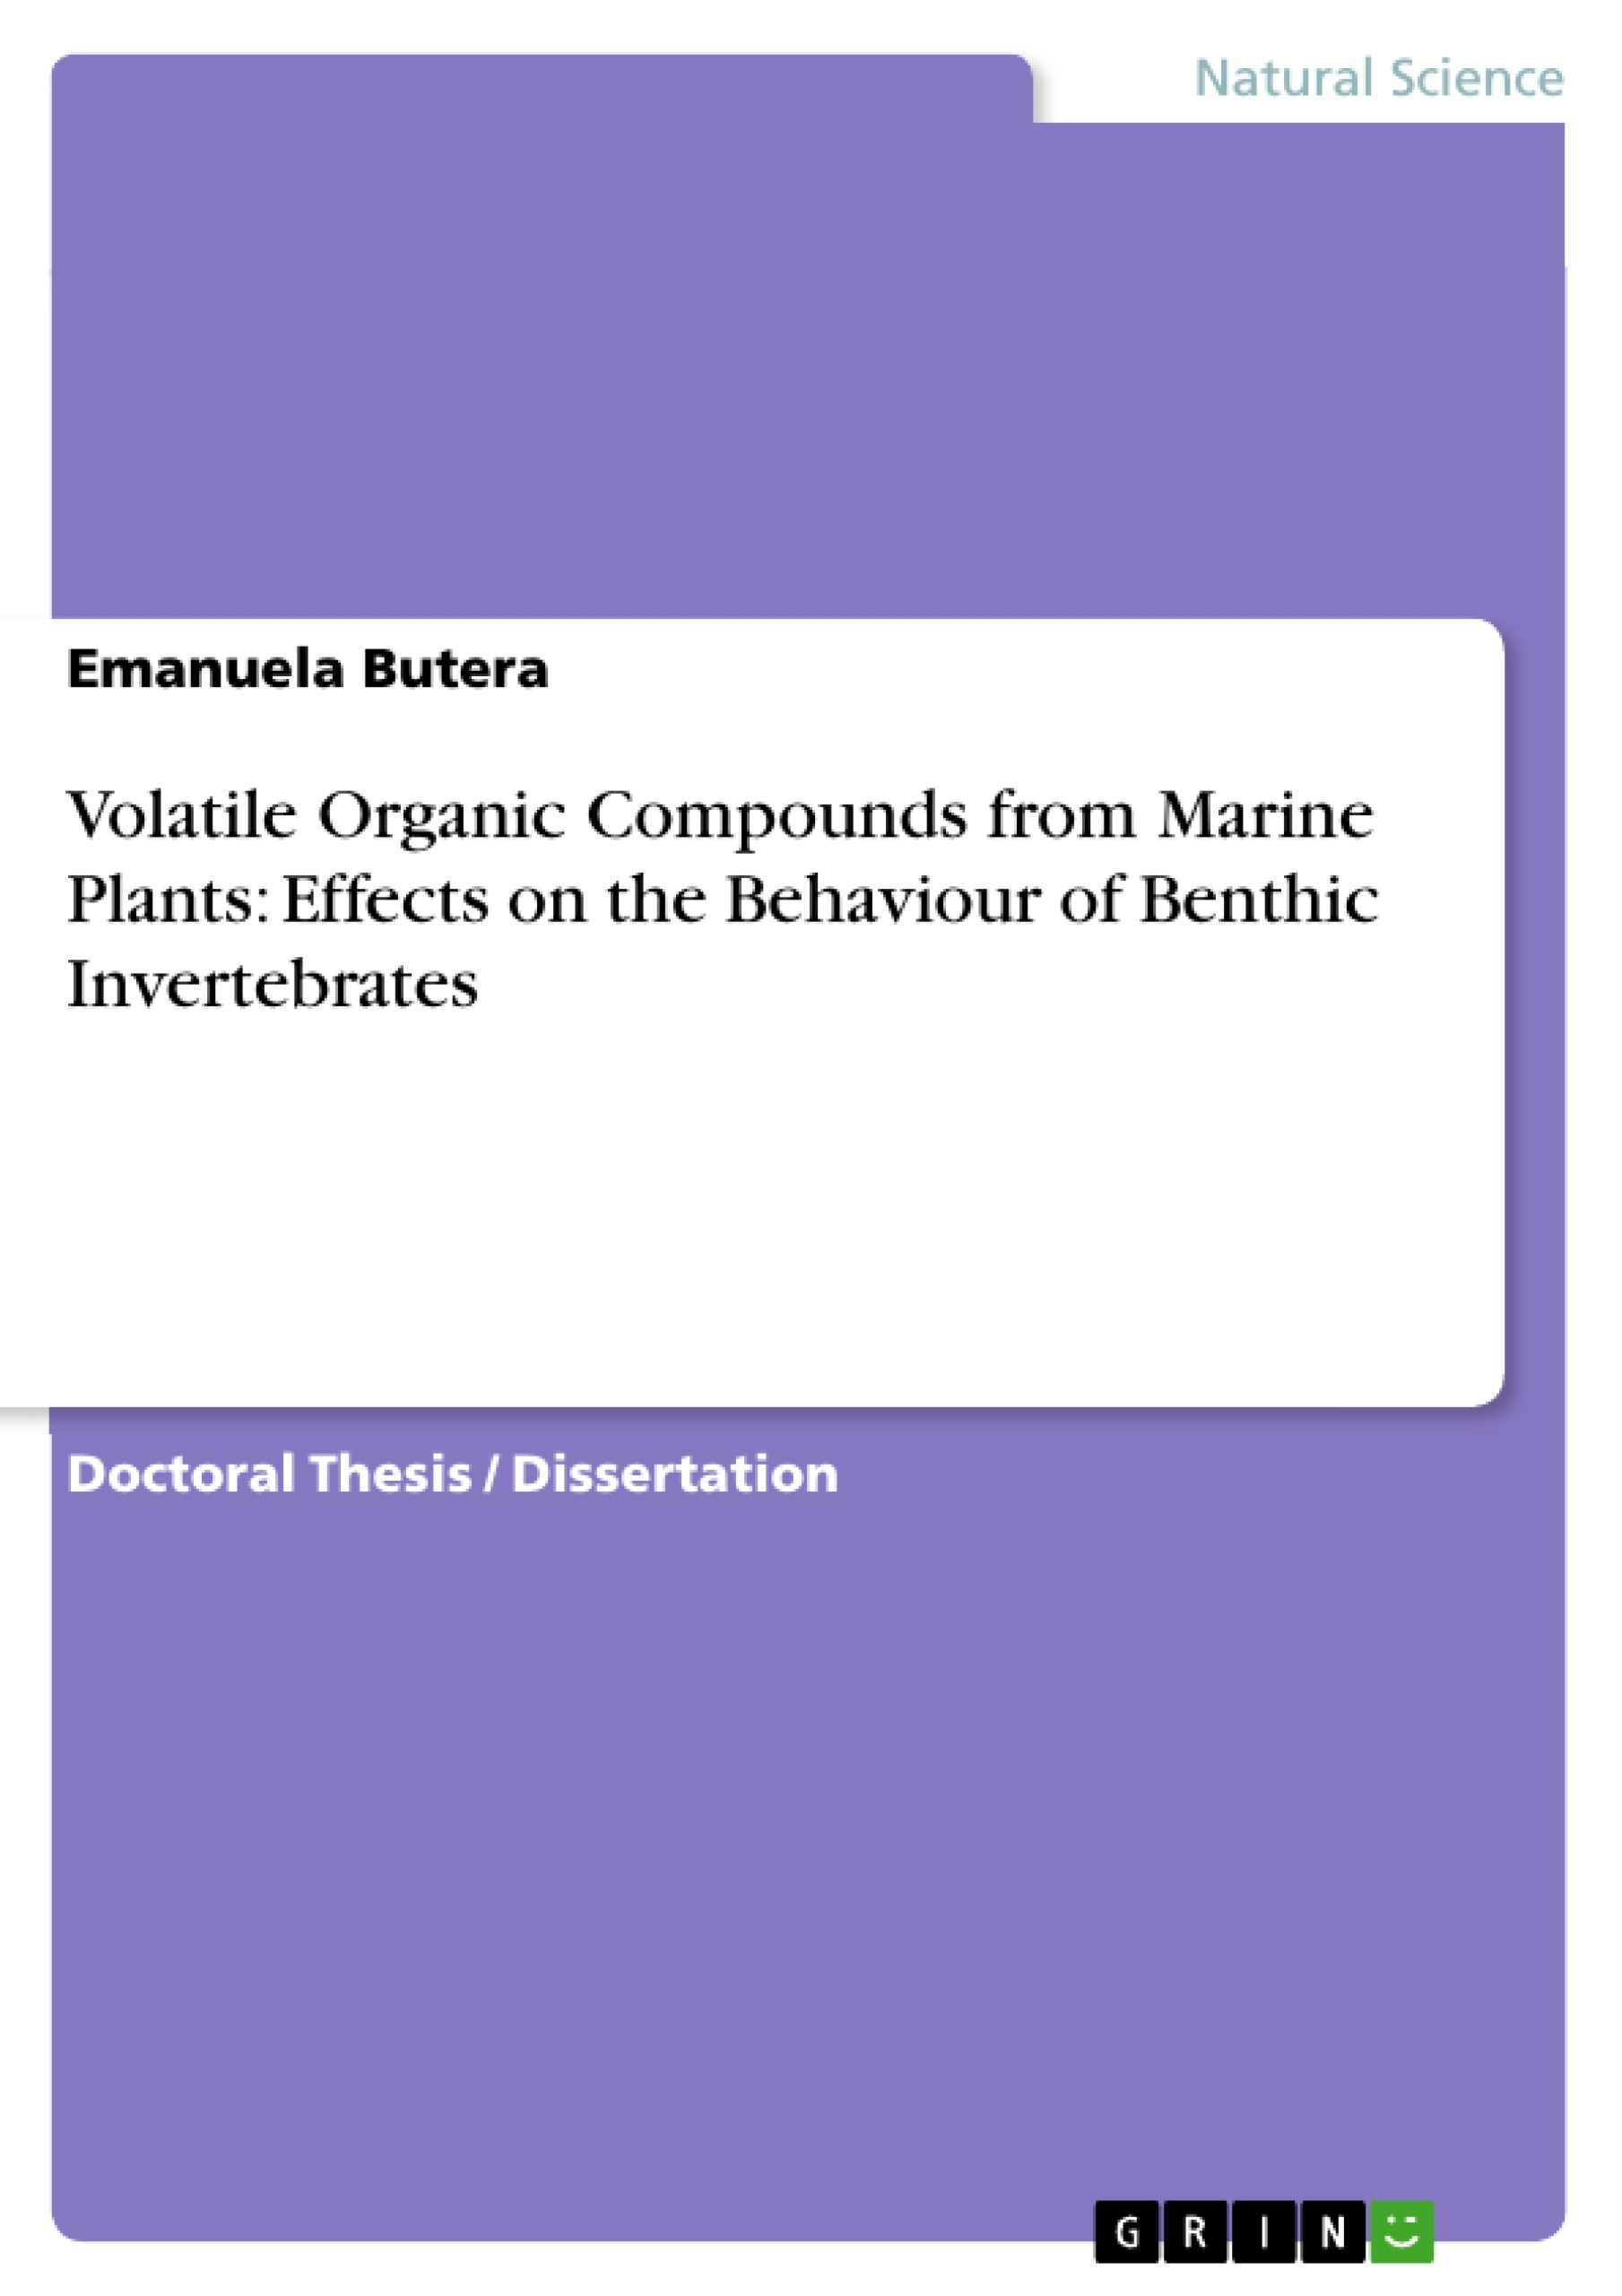 Titel: Volatile Organic Compounds from Marine Plants: Effects on the Behaviour of Benthic Invertebrates